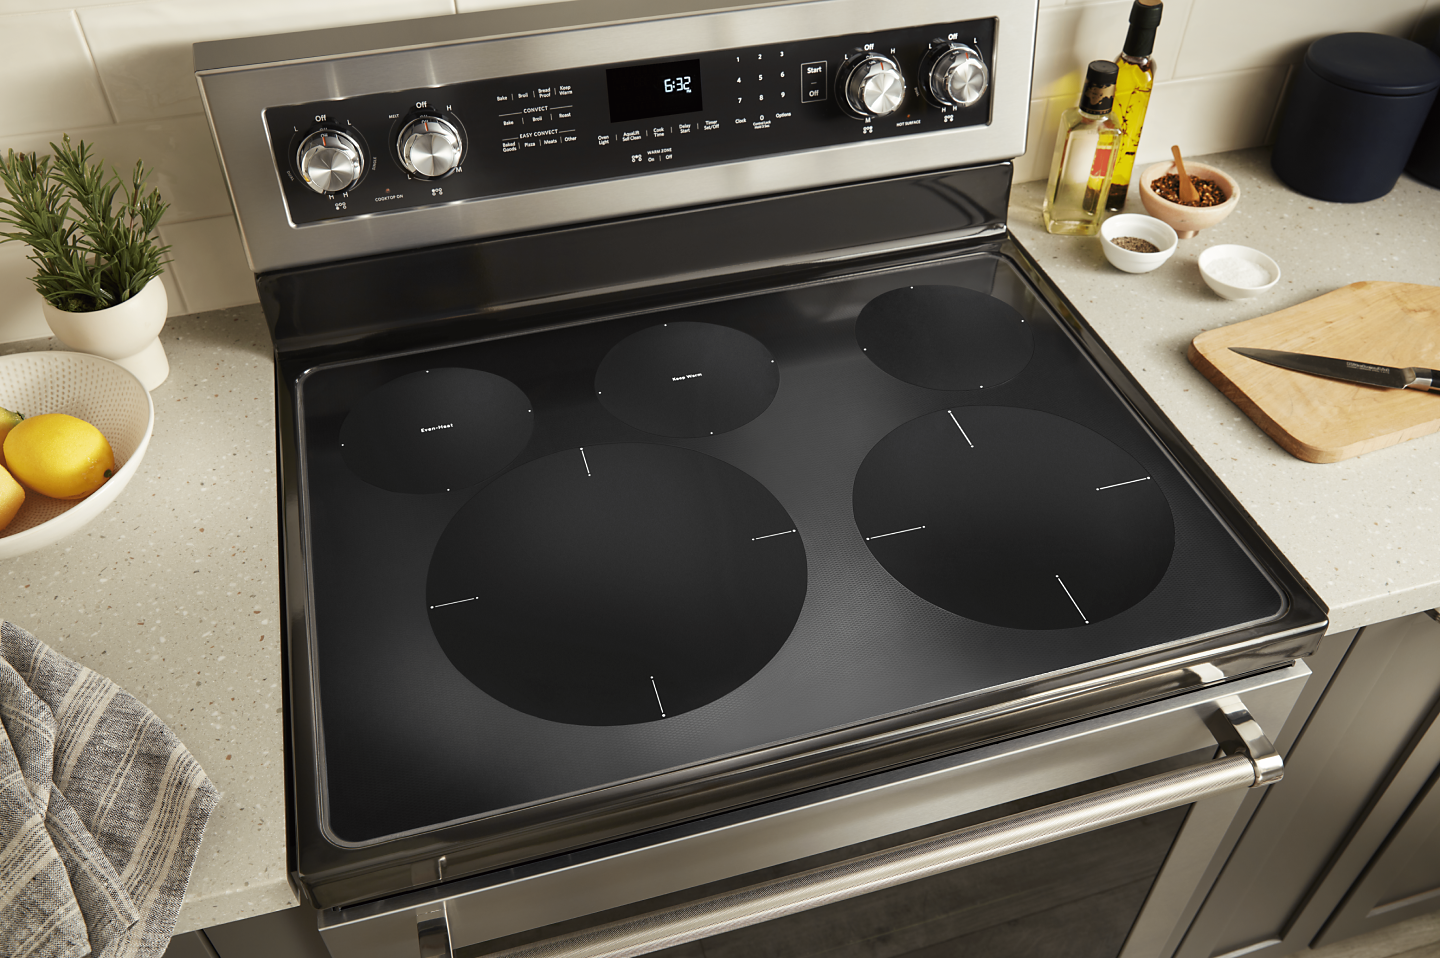 Birds-eye view of an electric stovetop with 5 cooking elements